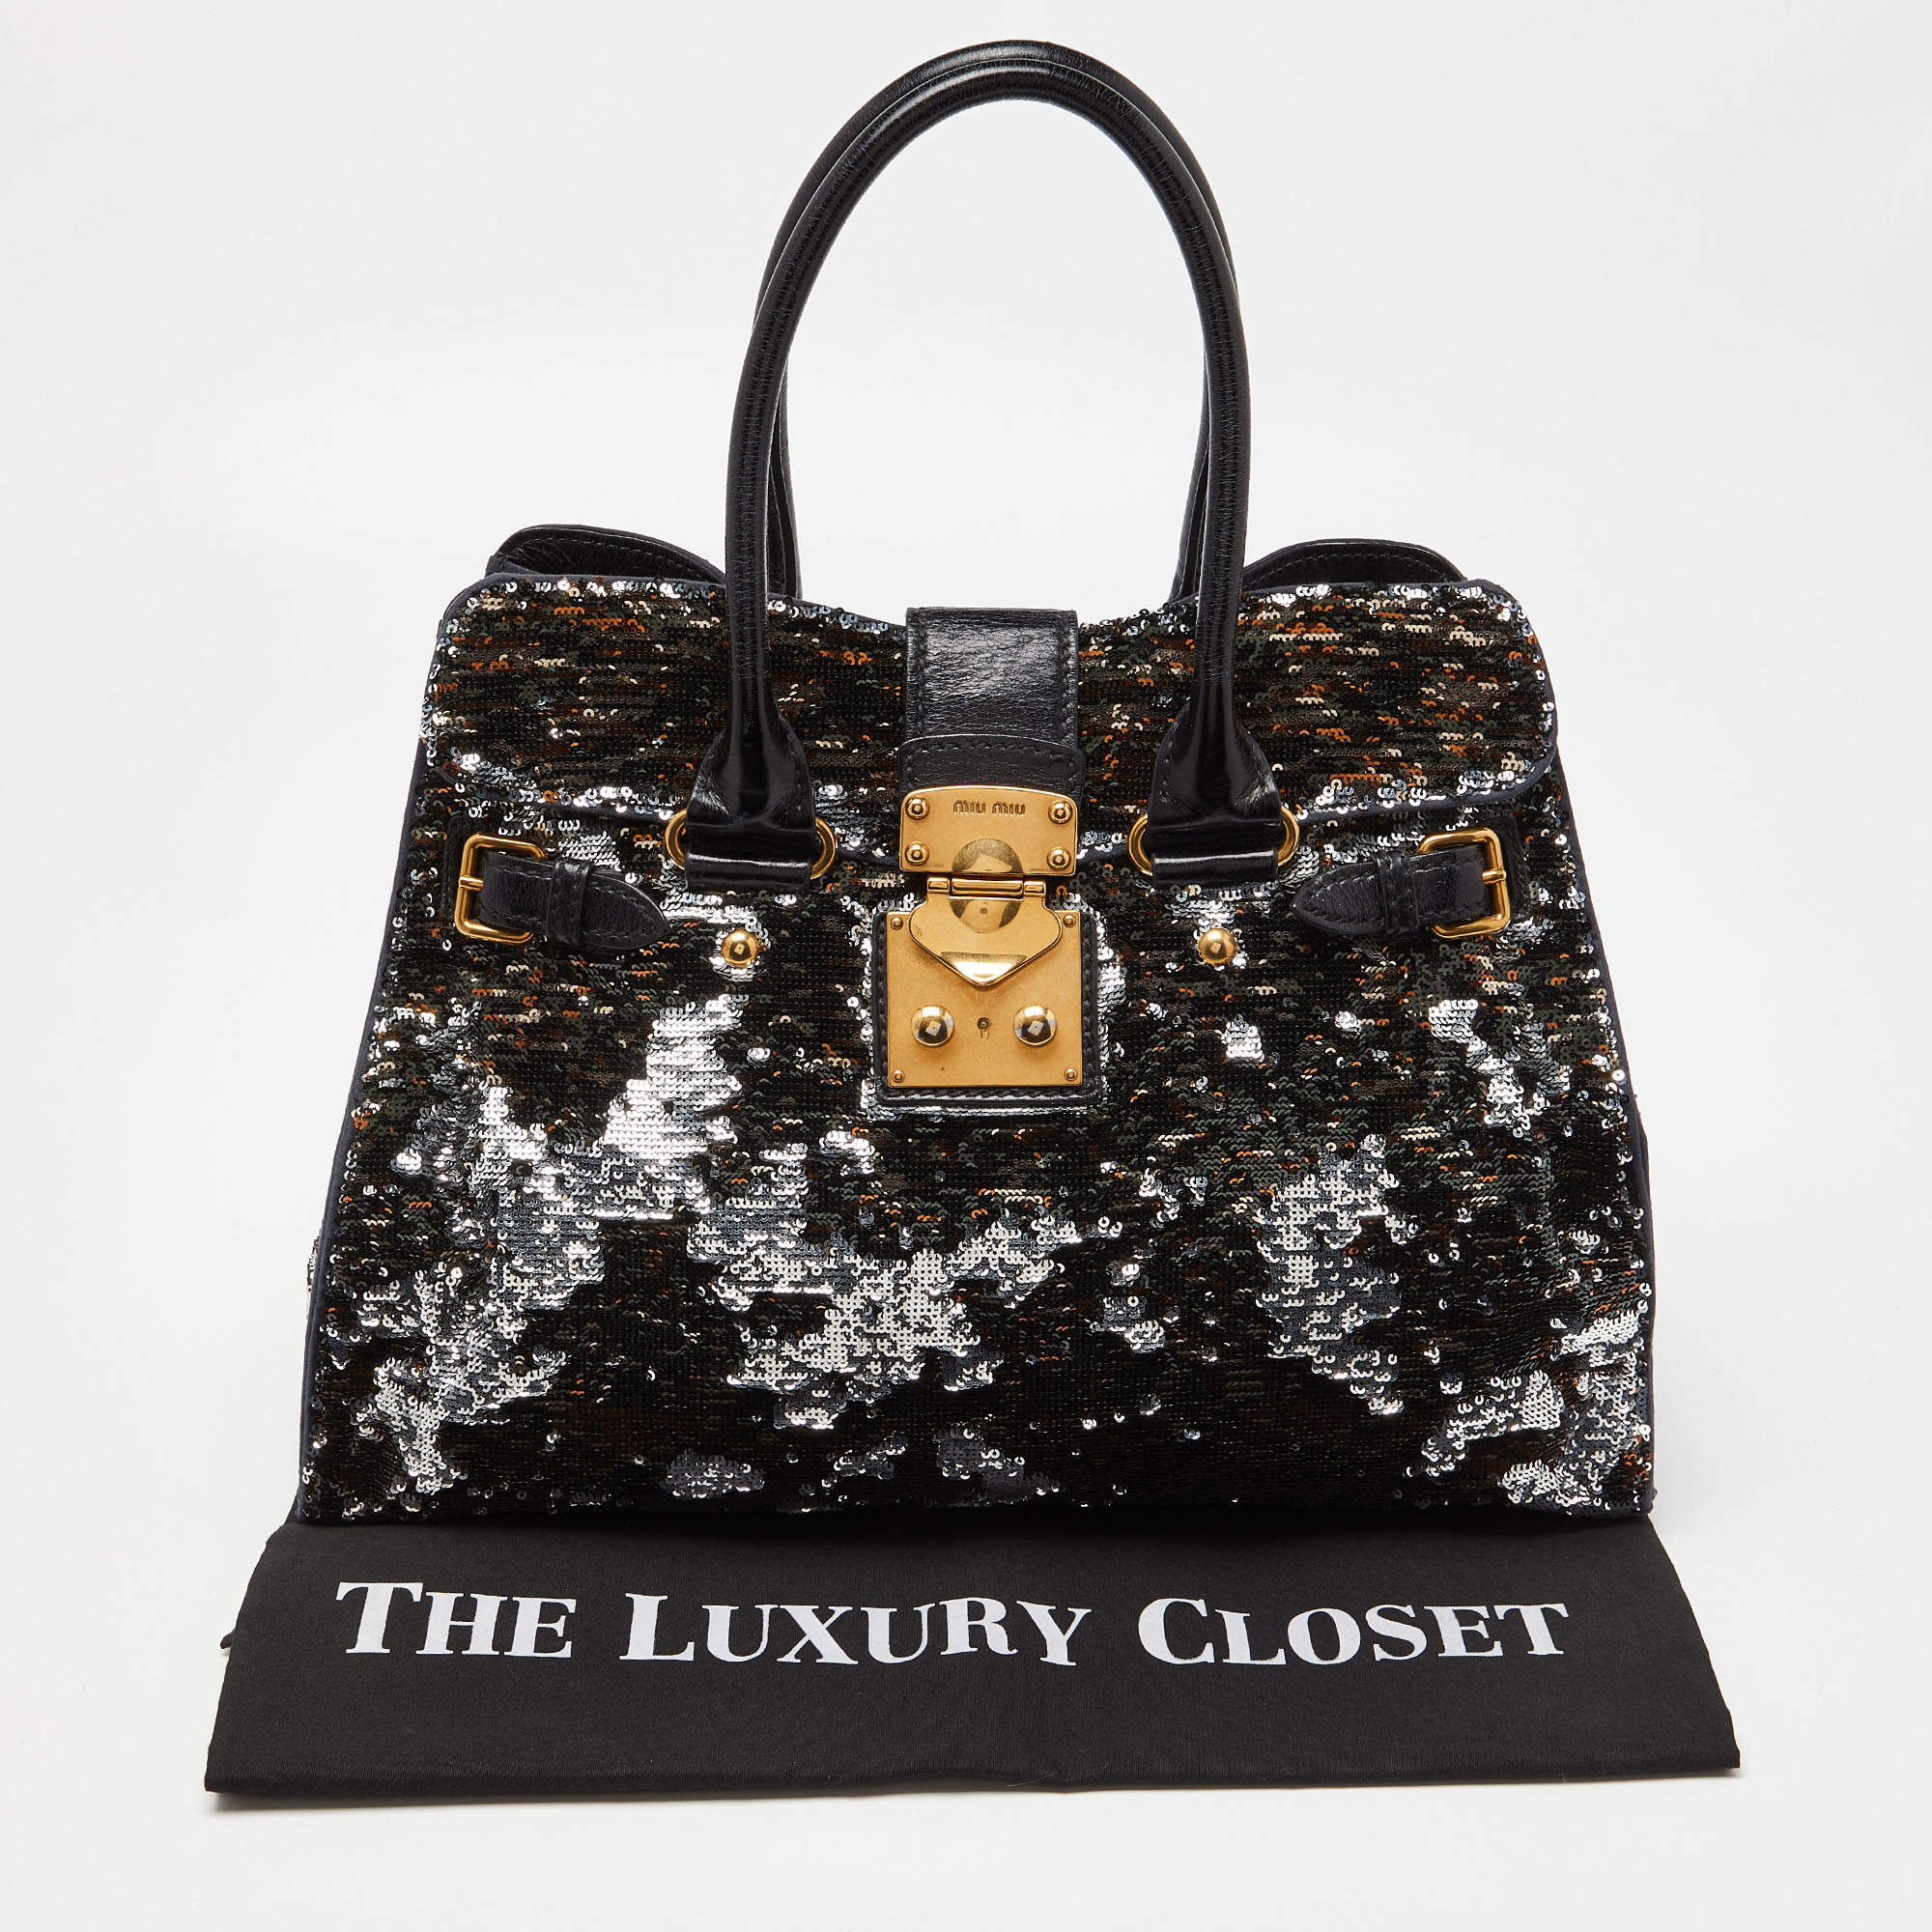 Louis Vuitton Petite Malle Sequins Black in Satin/Sequins with